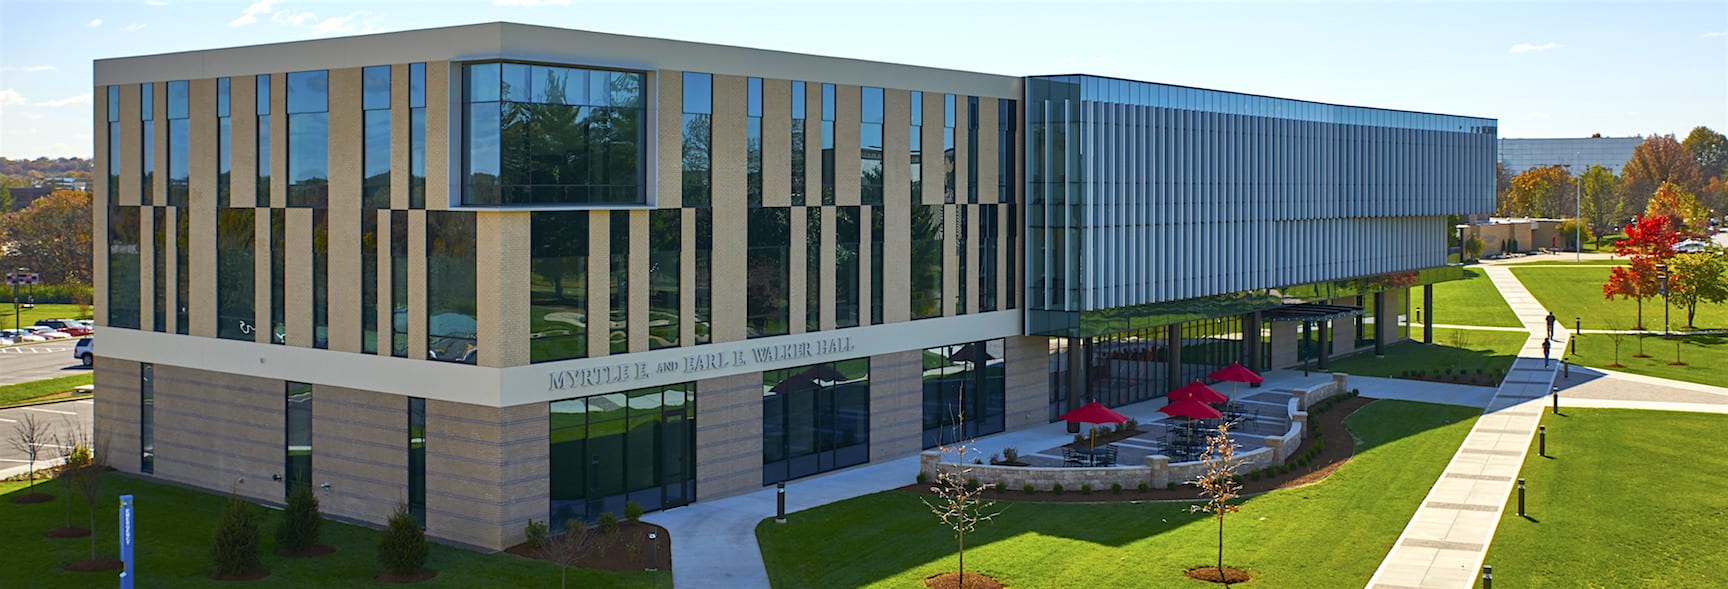 Maryville University’s new health professions building on October 31, 2014.